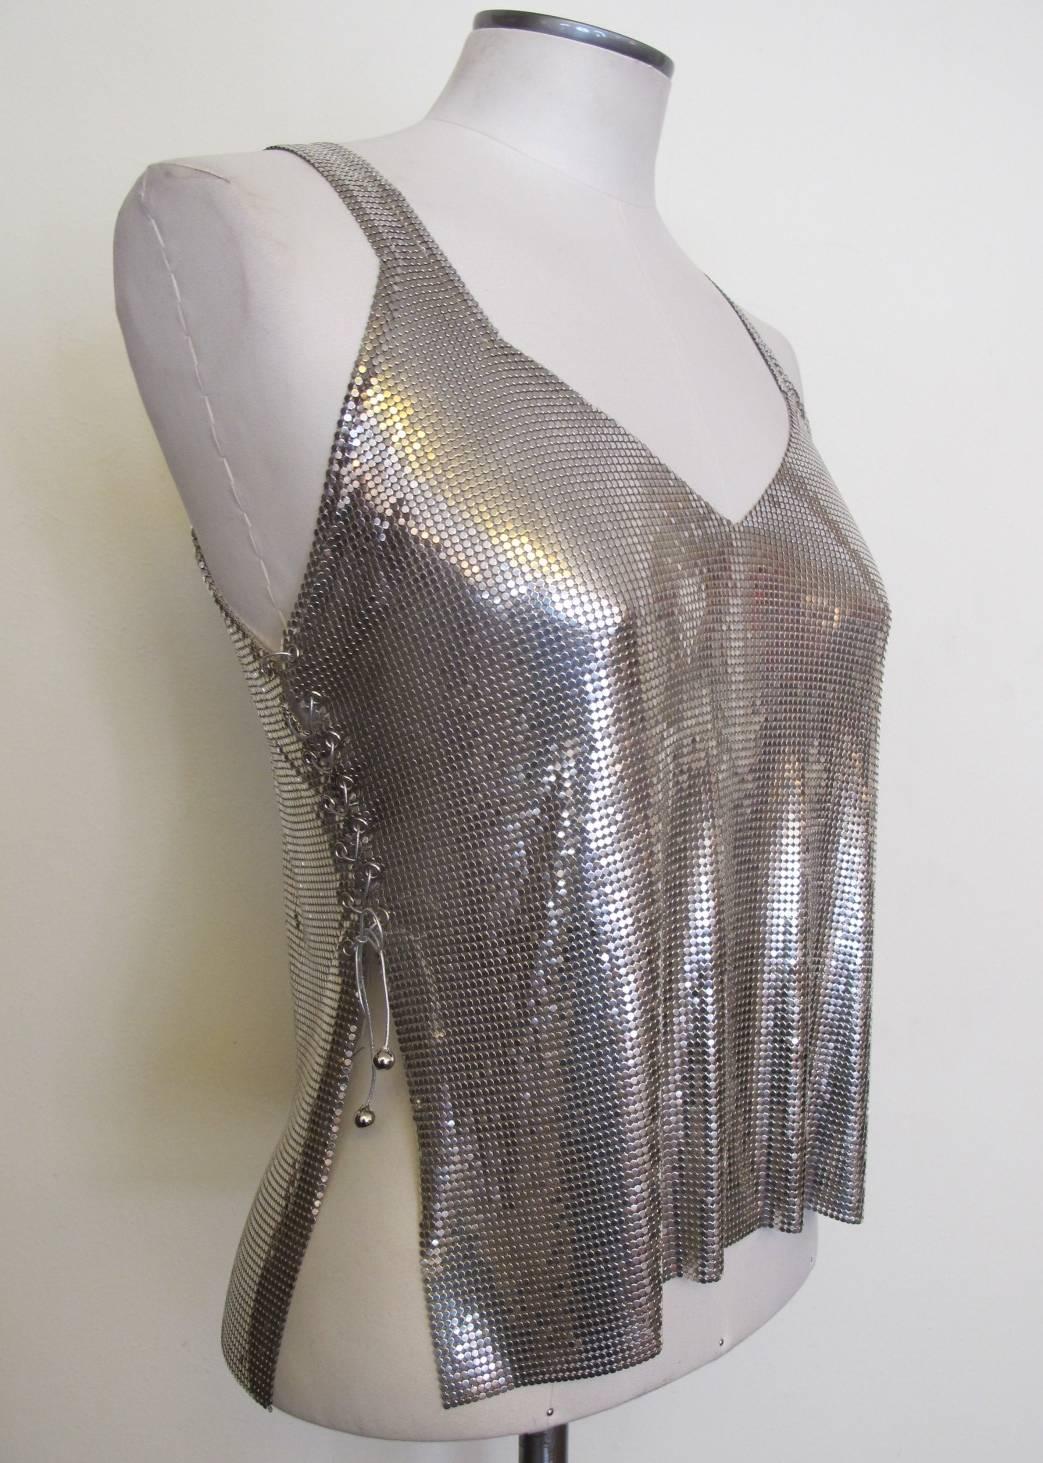 This over-the-top silver metal tank top is perfect for day or evening. There is an oval metal label inside the tank top saying: Paco Rabanne. Robanne through the decades has used the metal mesh medium for some of his impressive pieces. The sides are